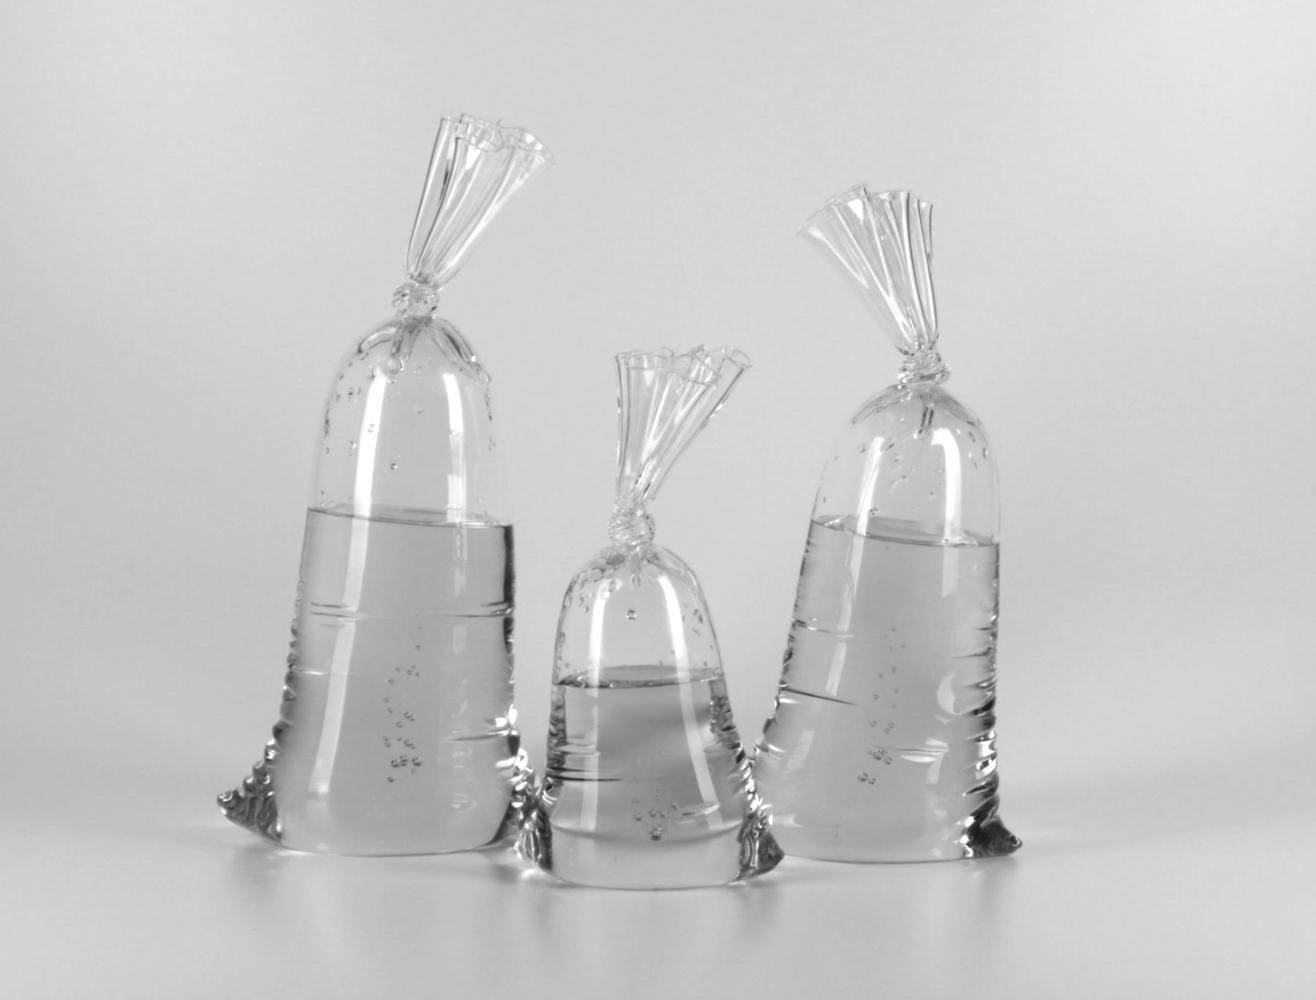 Small Glass Water Bag - Hyperreal glass sculpture - Sculpture by Dylan Martinez